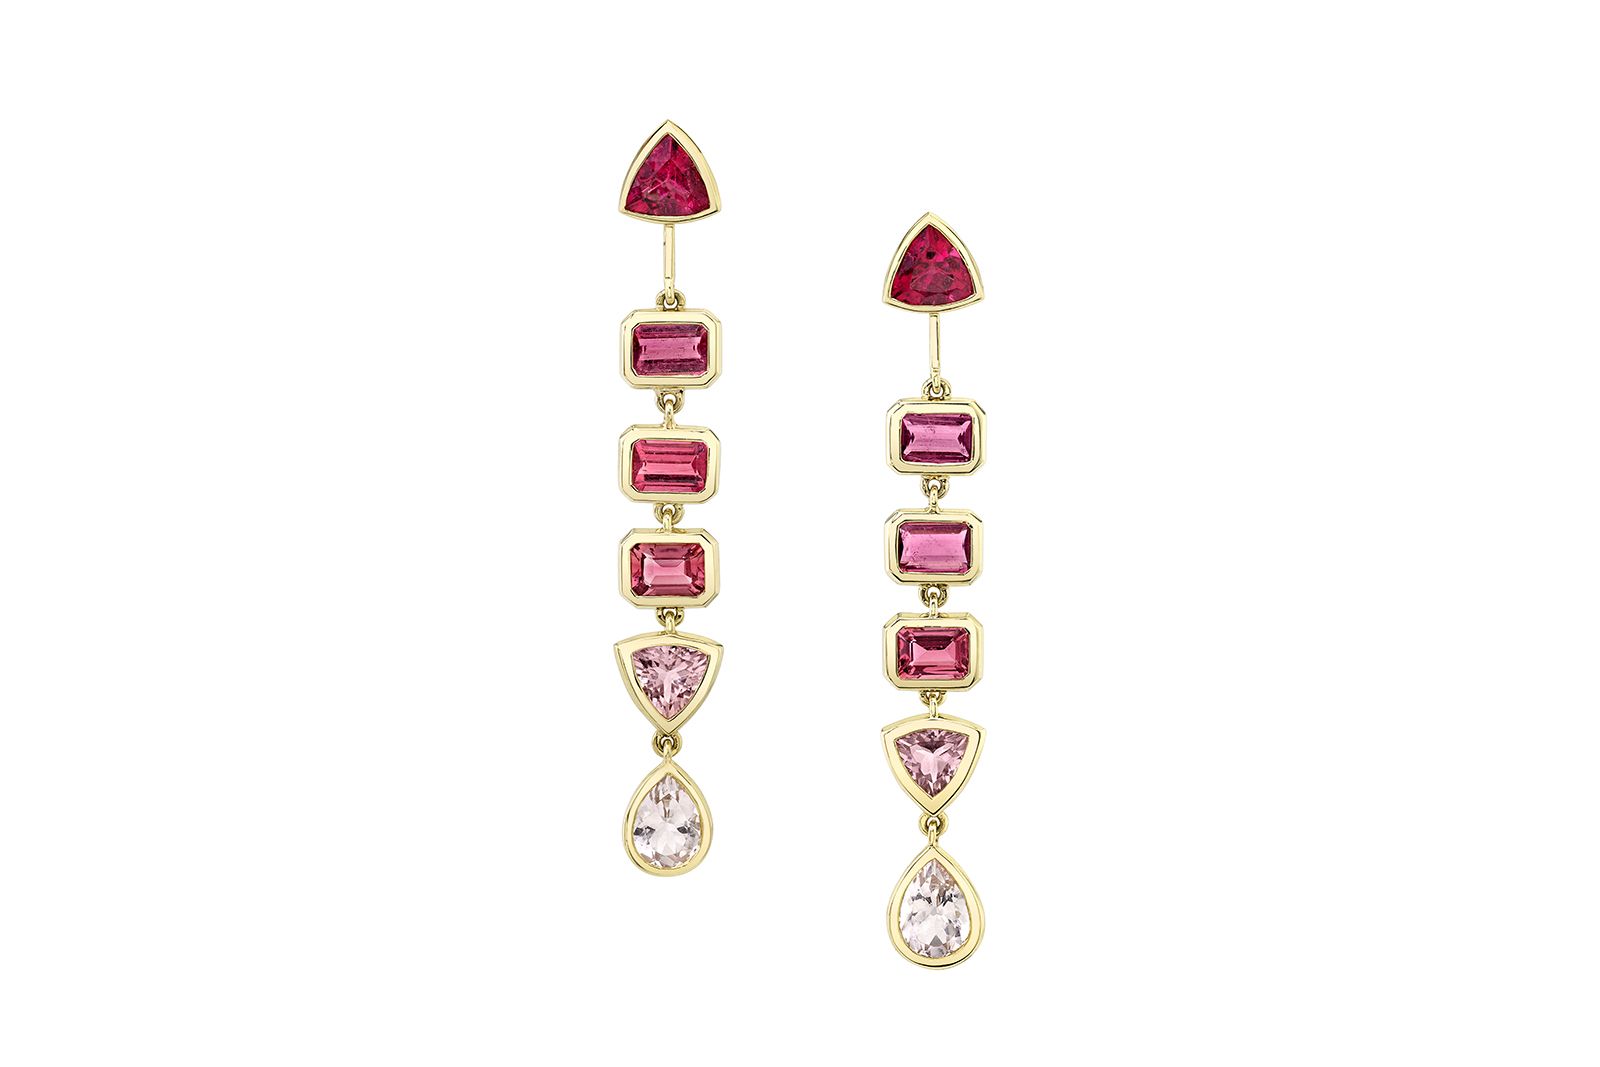 Viva Magenta: Shine Bright in Pantone Colour of the Year Jewels